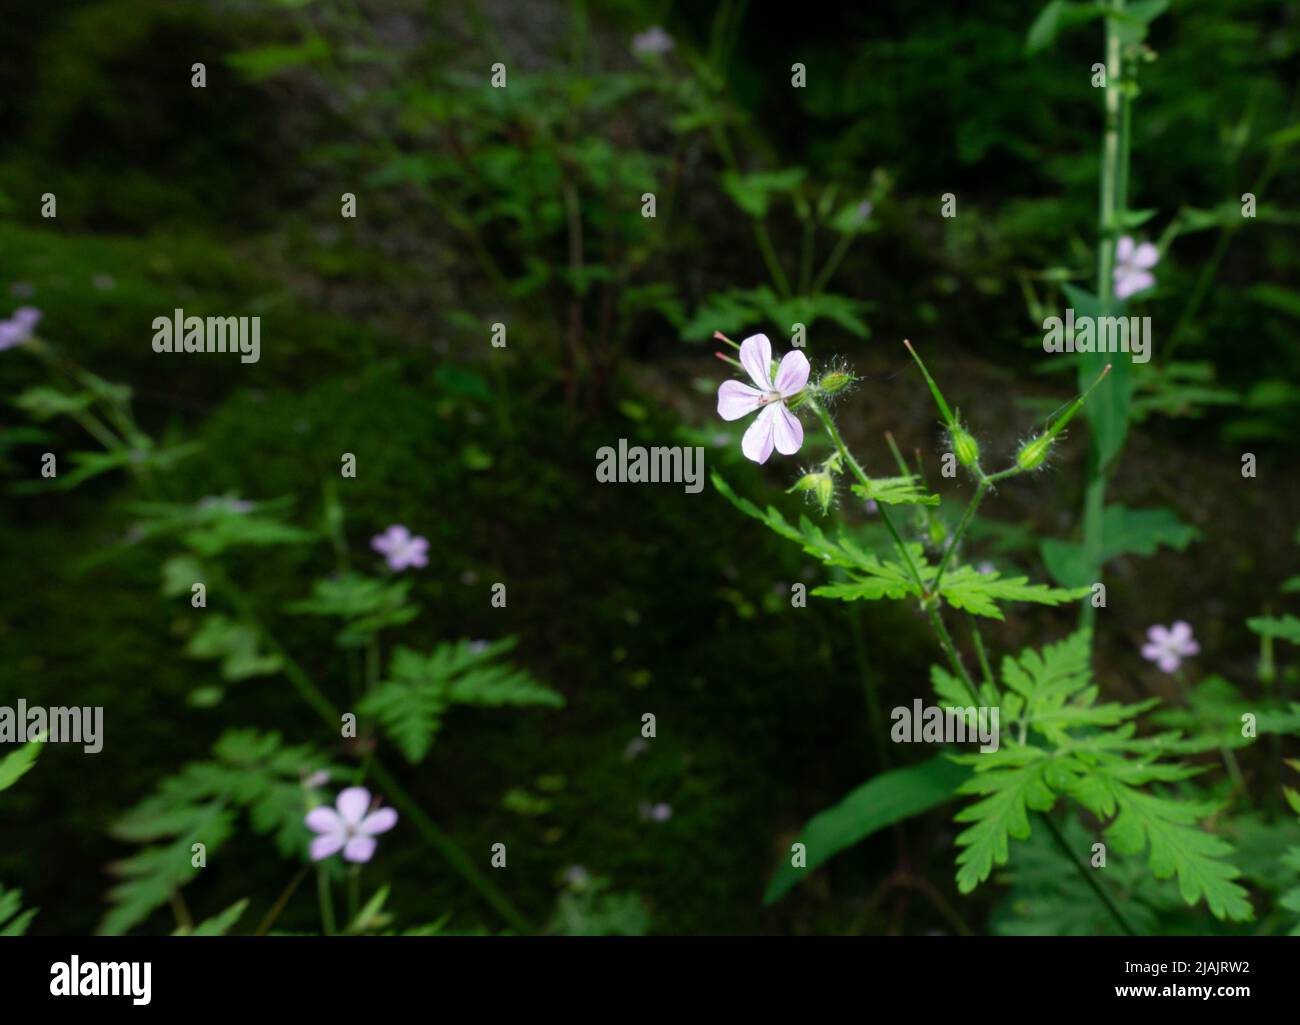 Cranesbill geranium renardii. Wild flower in the forest surrounded by wild plants and green foliage. Stock Photo